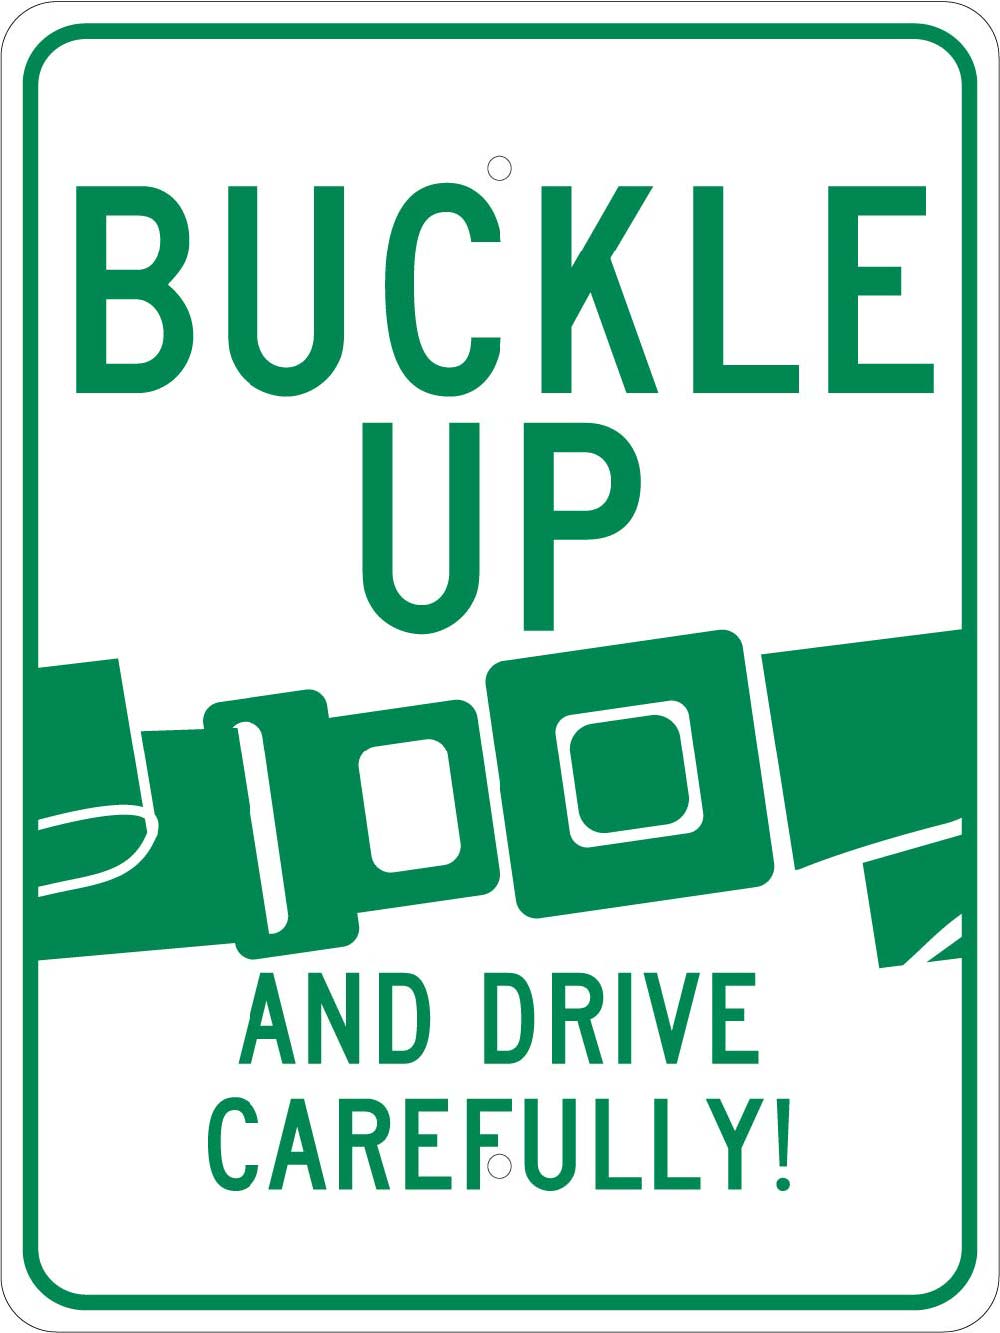 Buckle Up And Drive Carefully Sign-eSafety Supplies, Inc